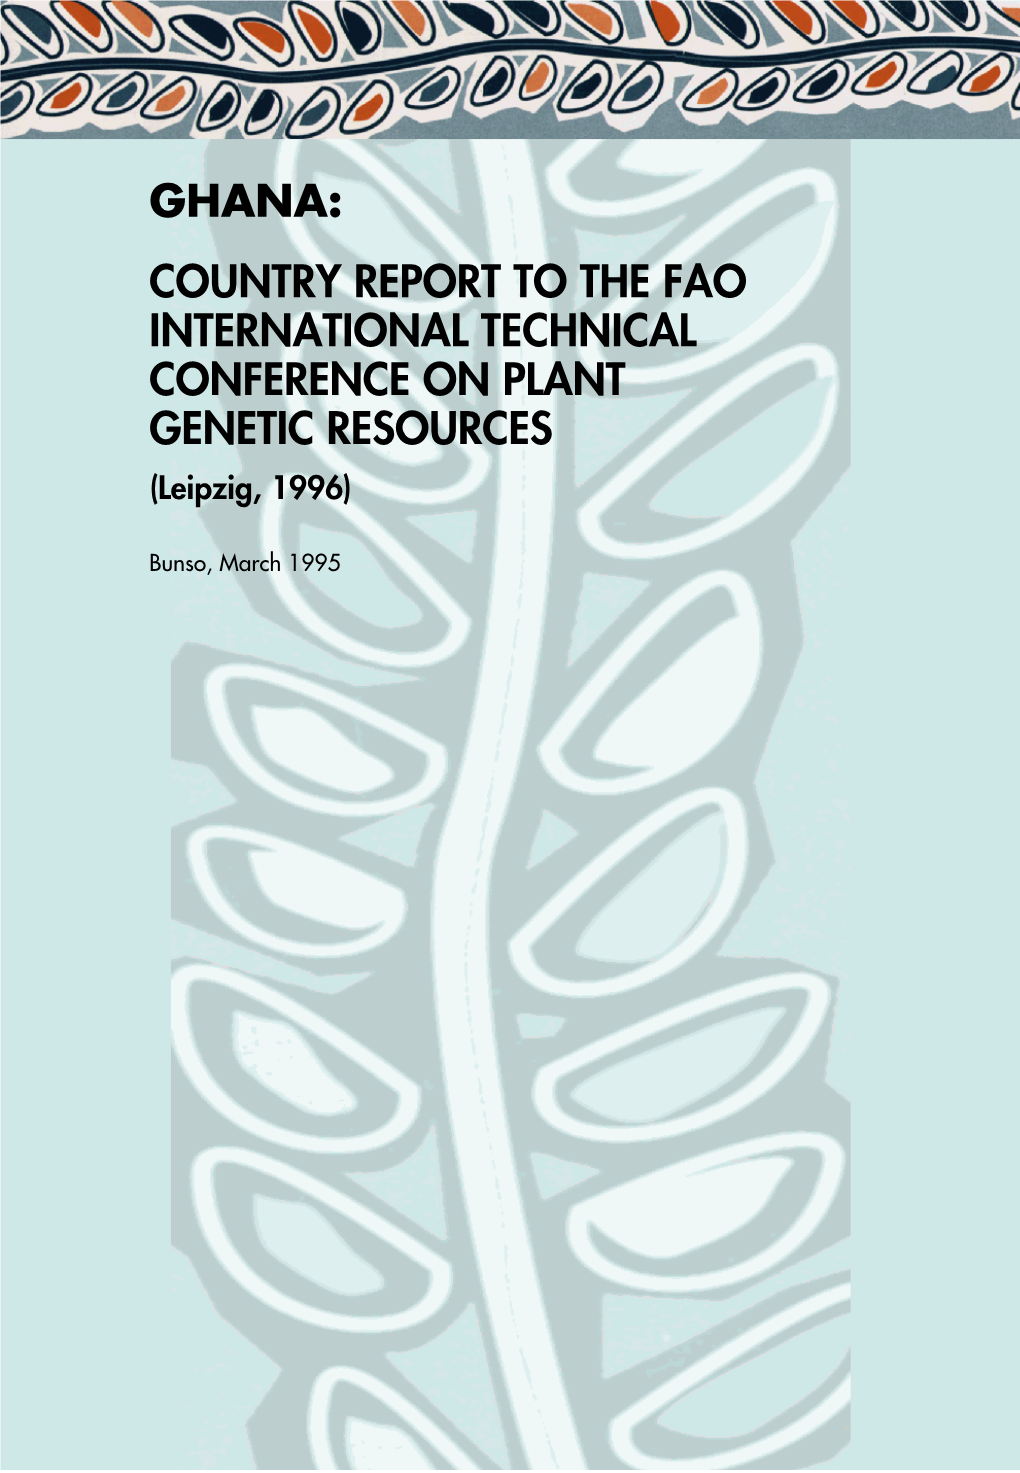 GHANA: COUNTRY REPORT to the FAO INTERNATIONAL TECHNICAL CONFERENCE on PLANT GENETIC RESOURCES (Leipzig, 1996)